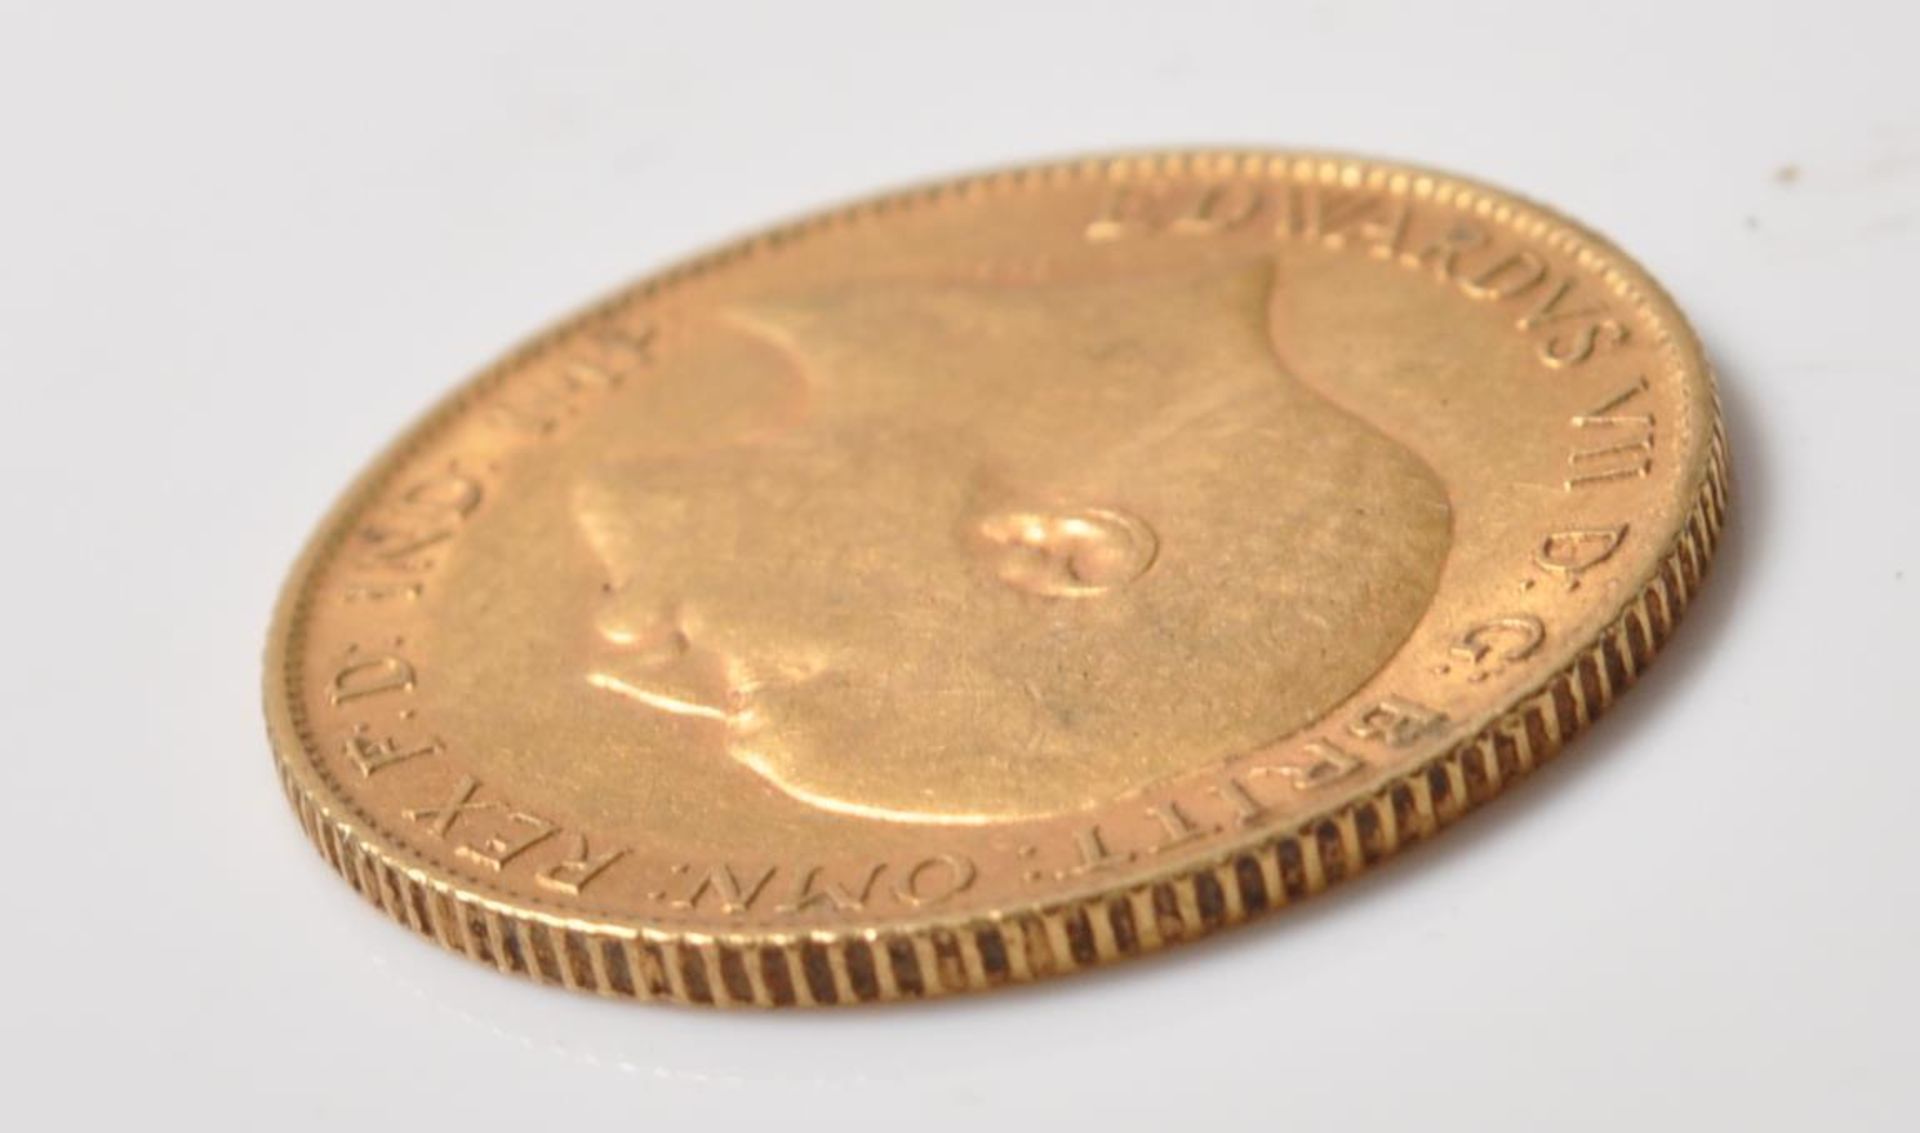 EDWARDIAN 1907 GOLD HALF SOVEREIGN COIN - Image 3 of 4